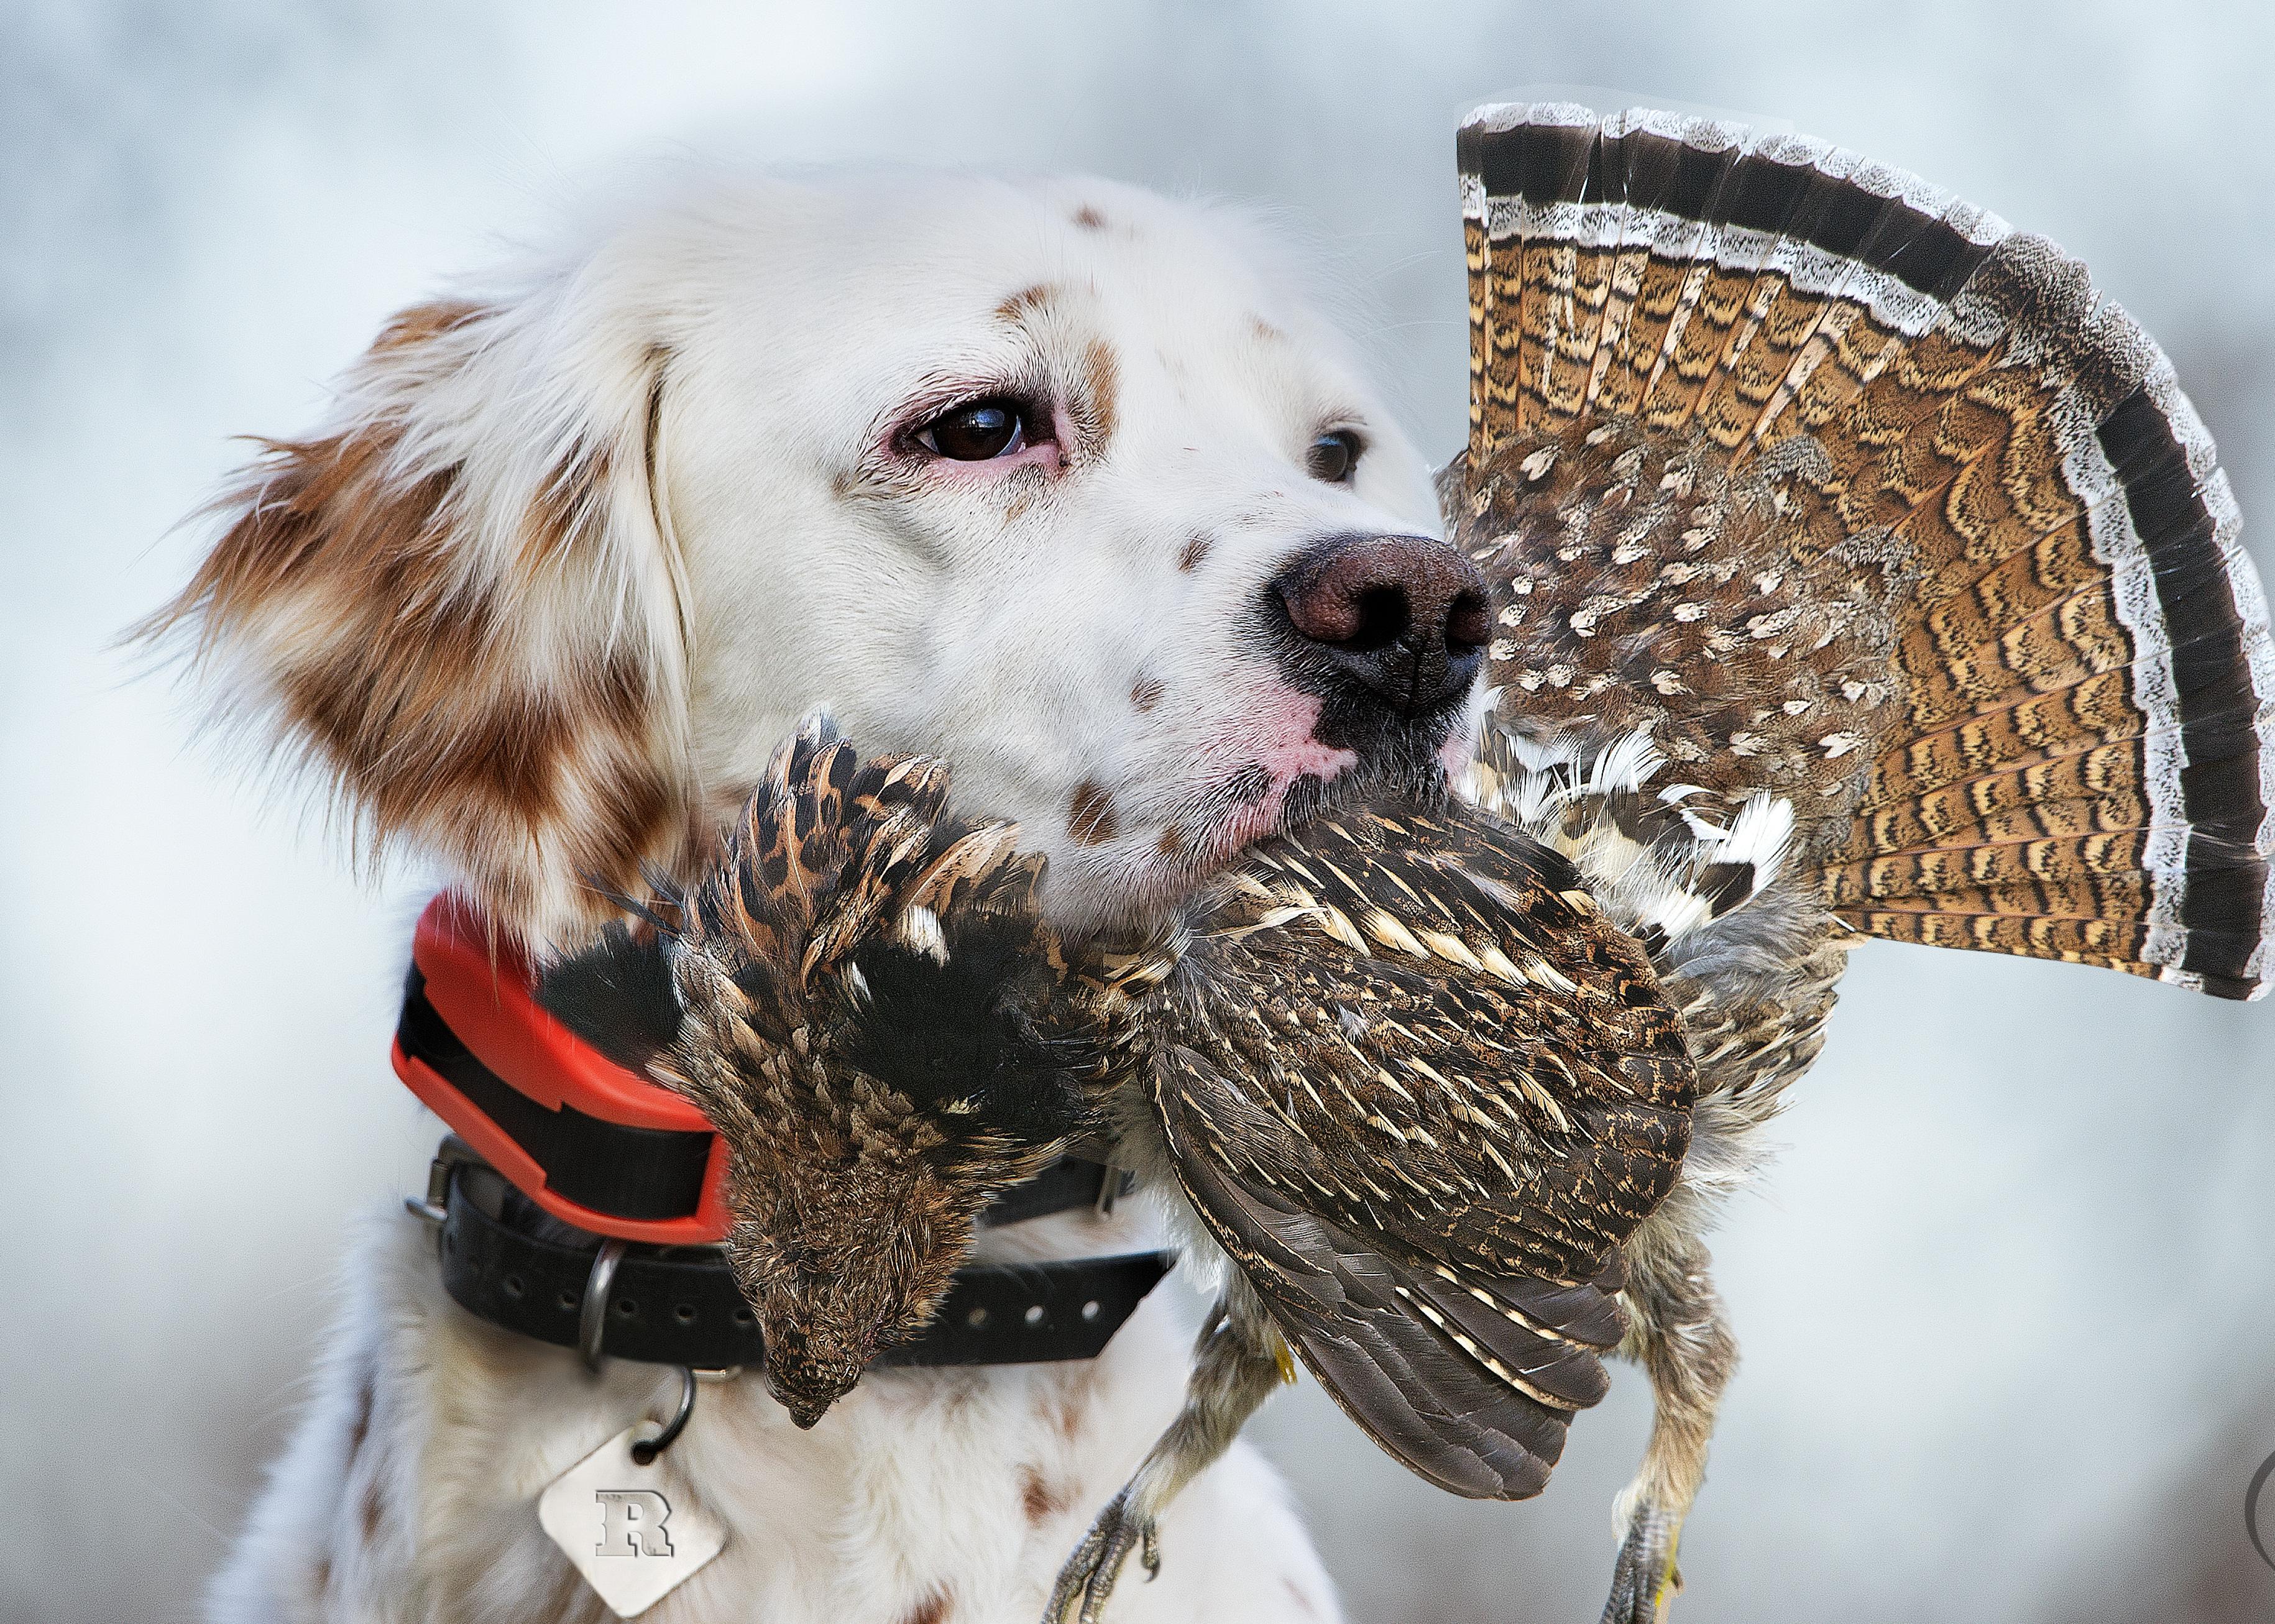 Setter with orange e-collar on with grouse in mouth.